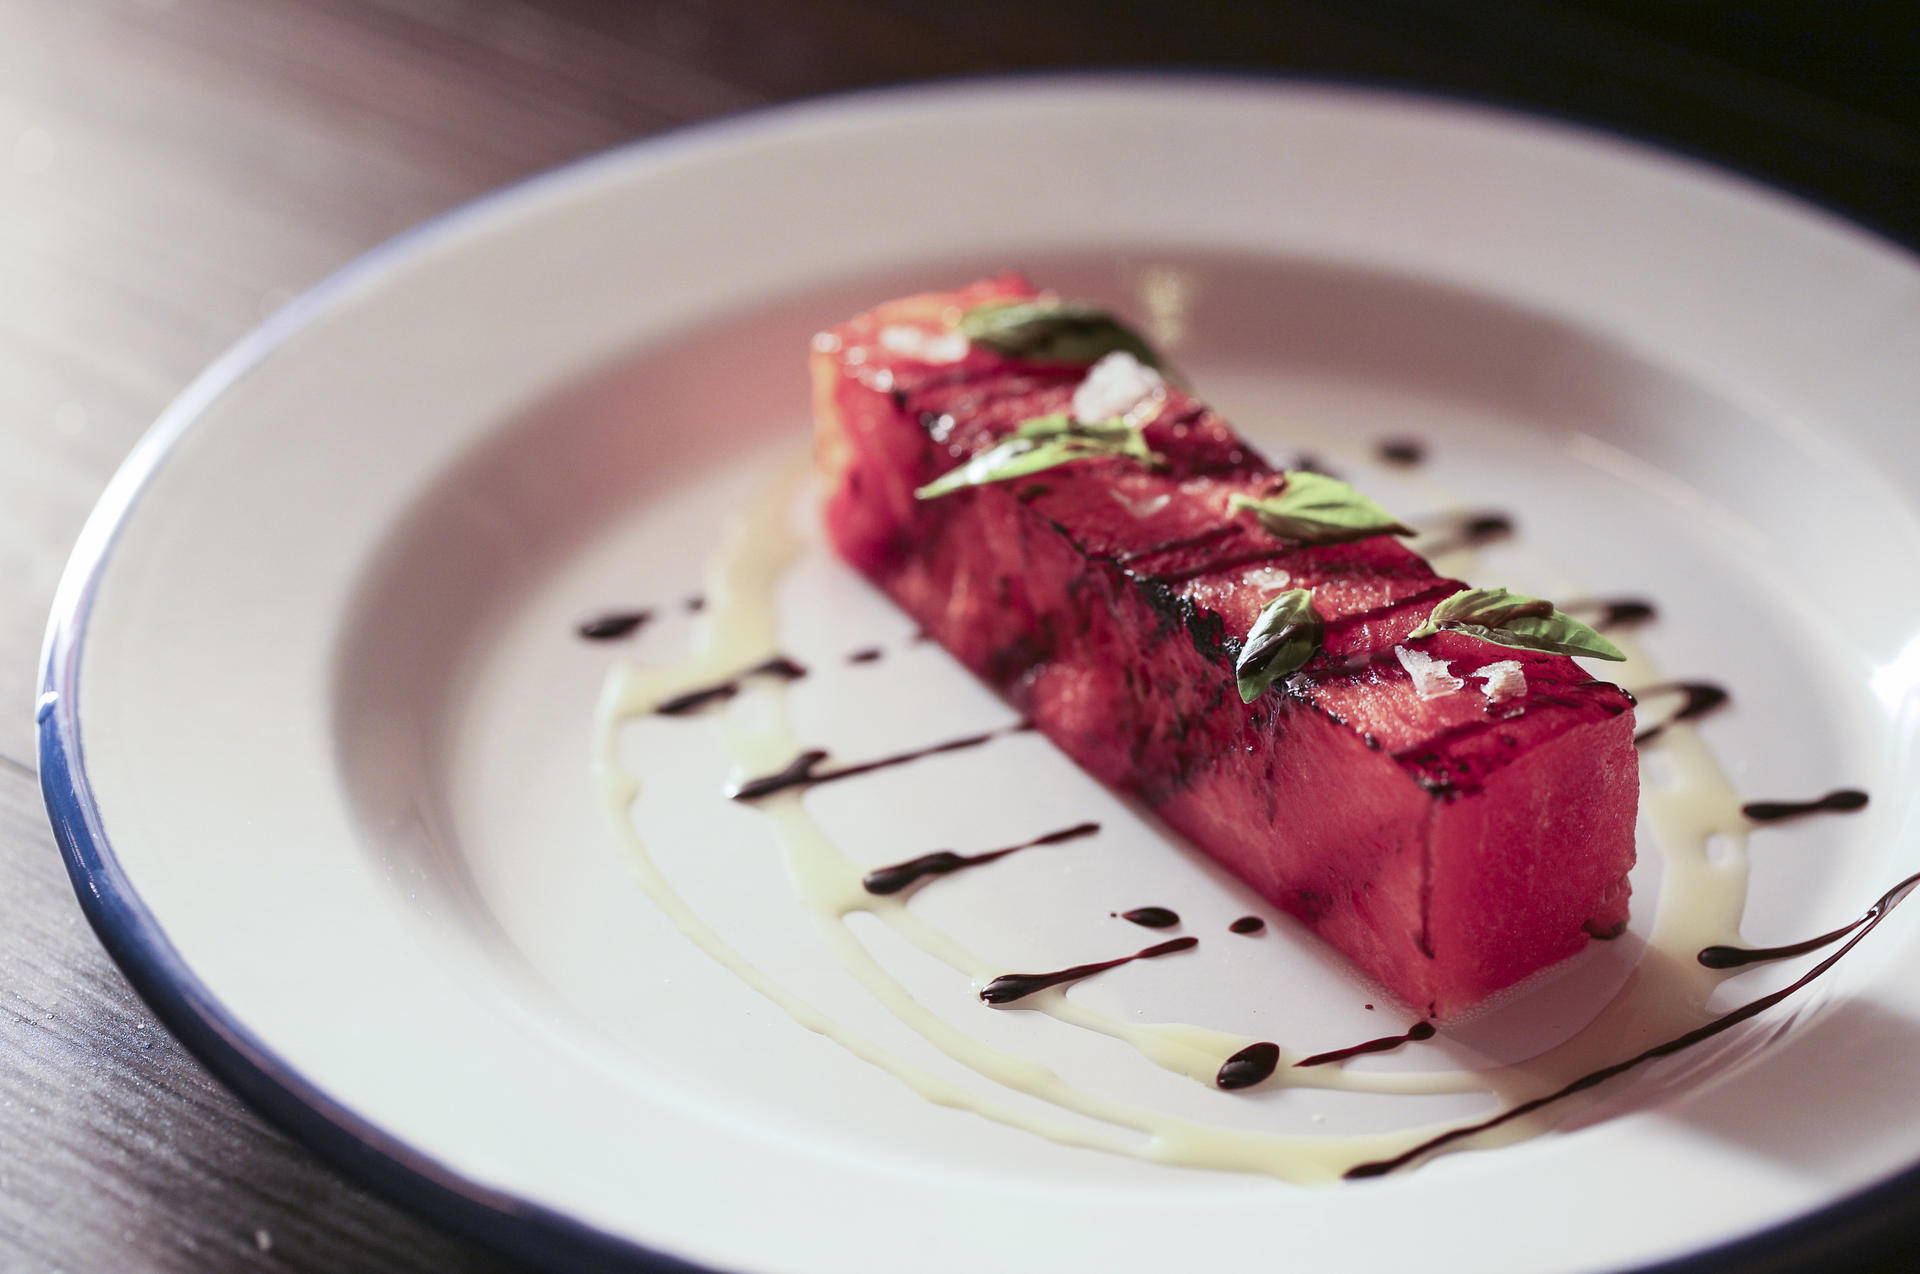 Grilled watermelon steak with charred flavour at Risi e Bisi